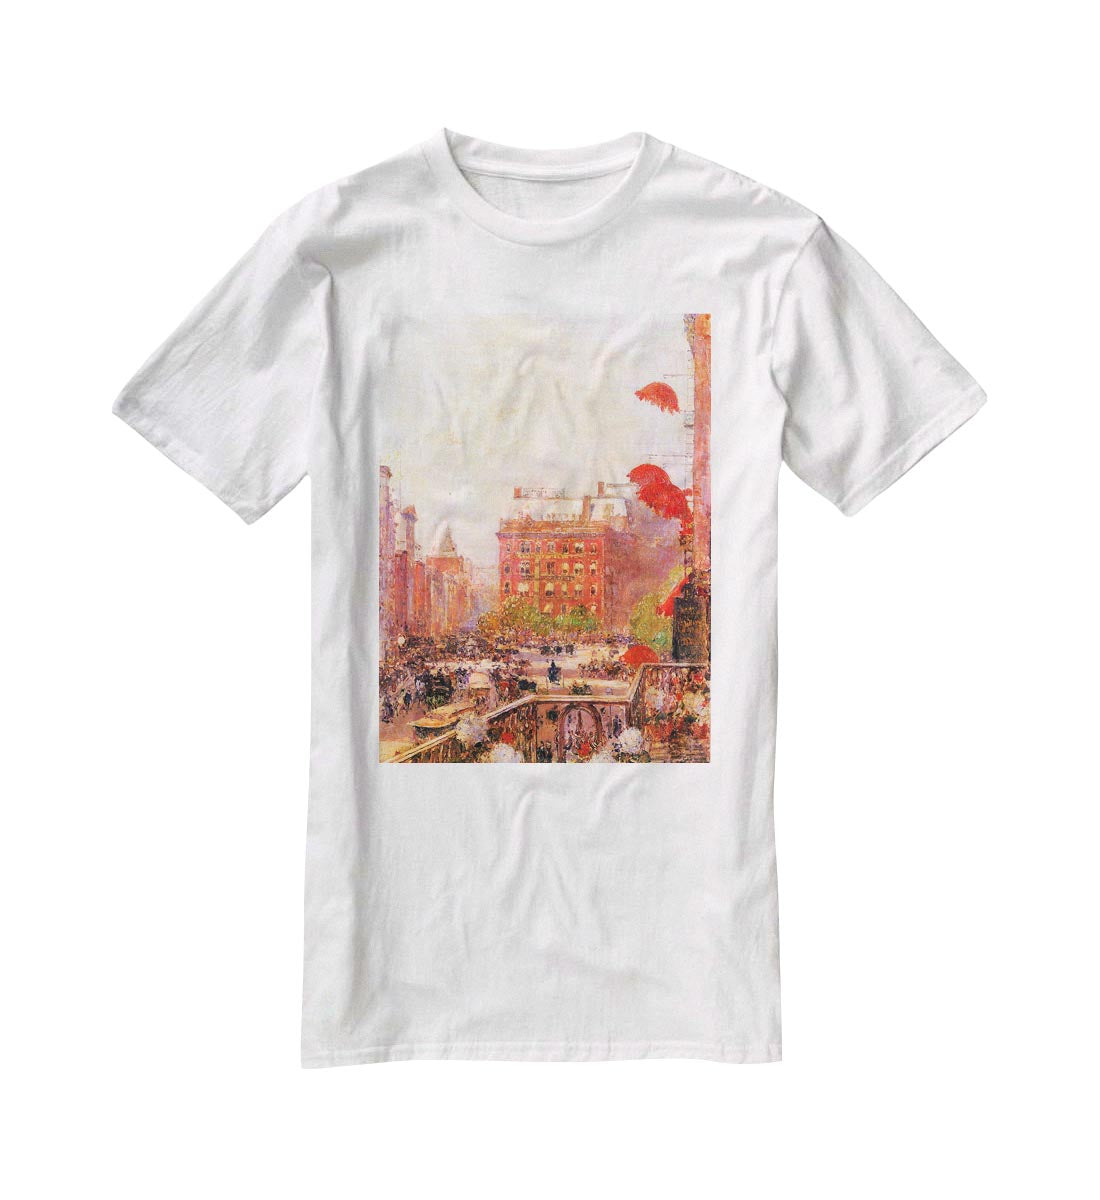 Broadway and Fifth Avenue by Hassam T-Shirt - Canvas Art Rocks - 5